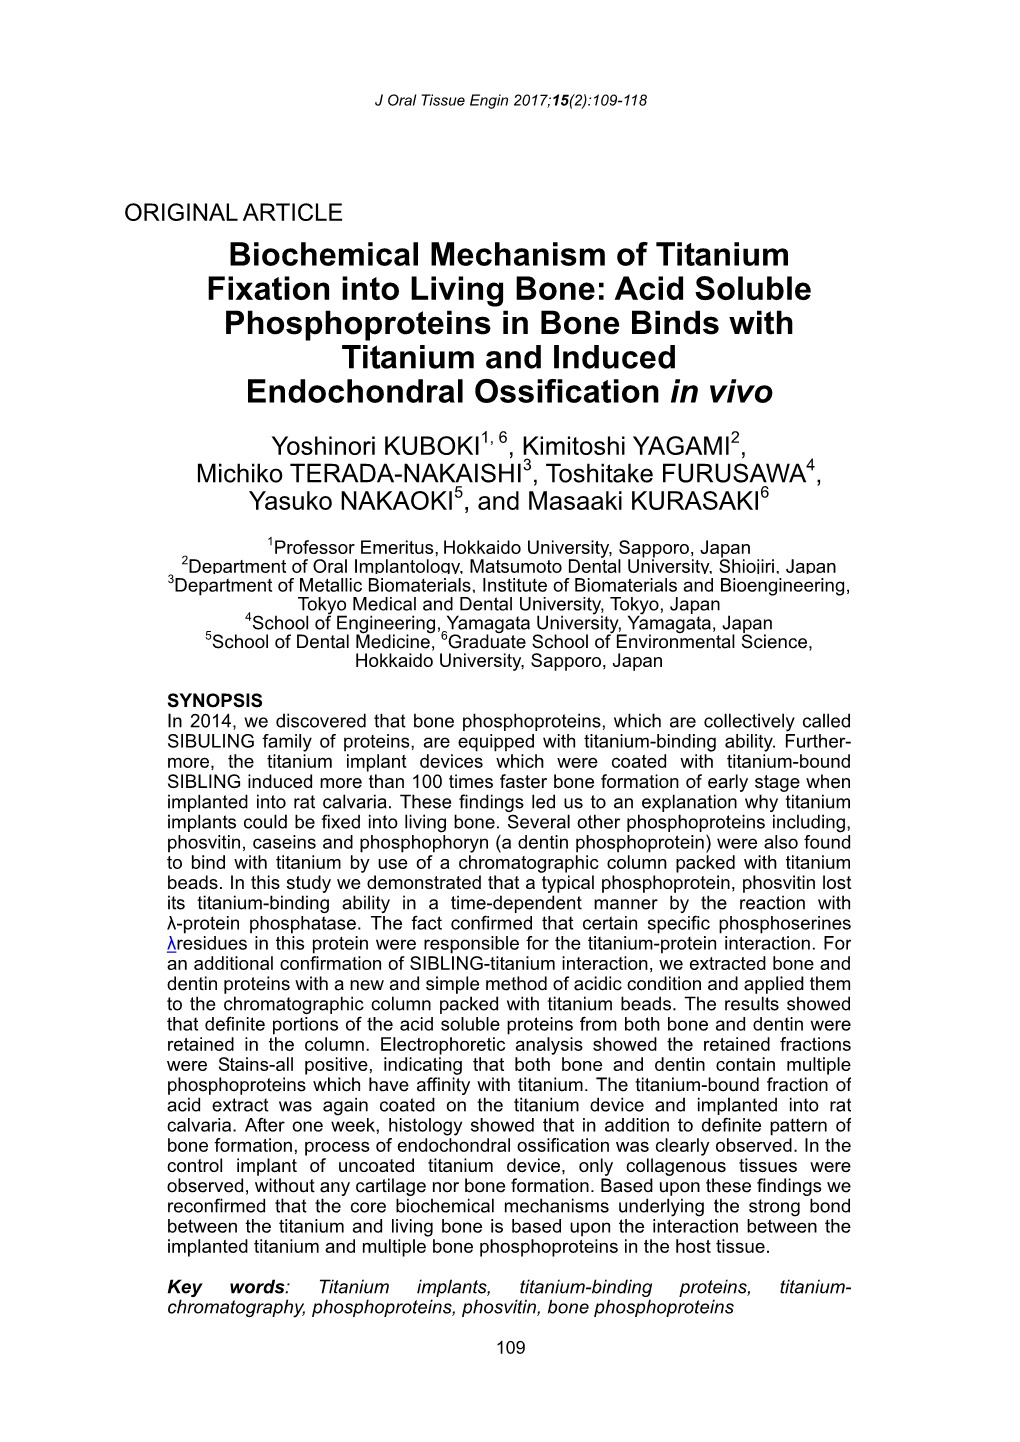 Acid Soluble Phosphoproteins in Bone Binds with Titanium and Induced Endochondral Ossification in Vivo